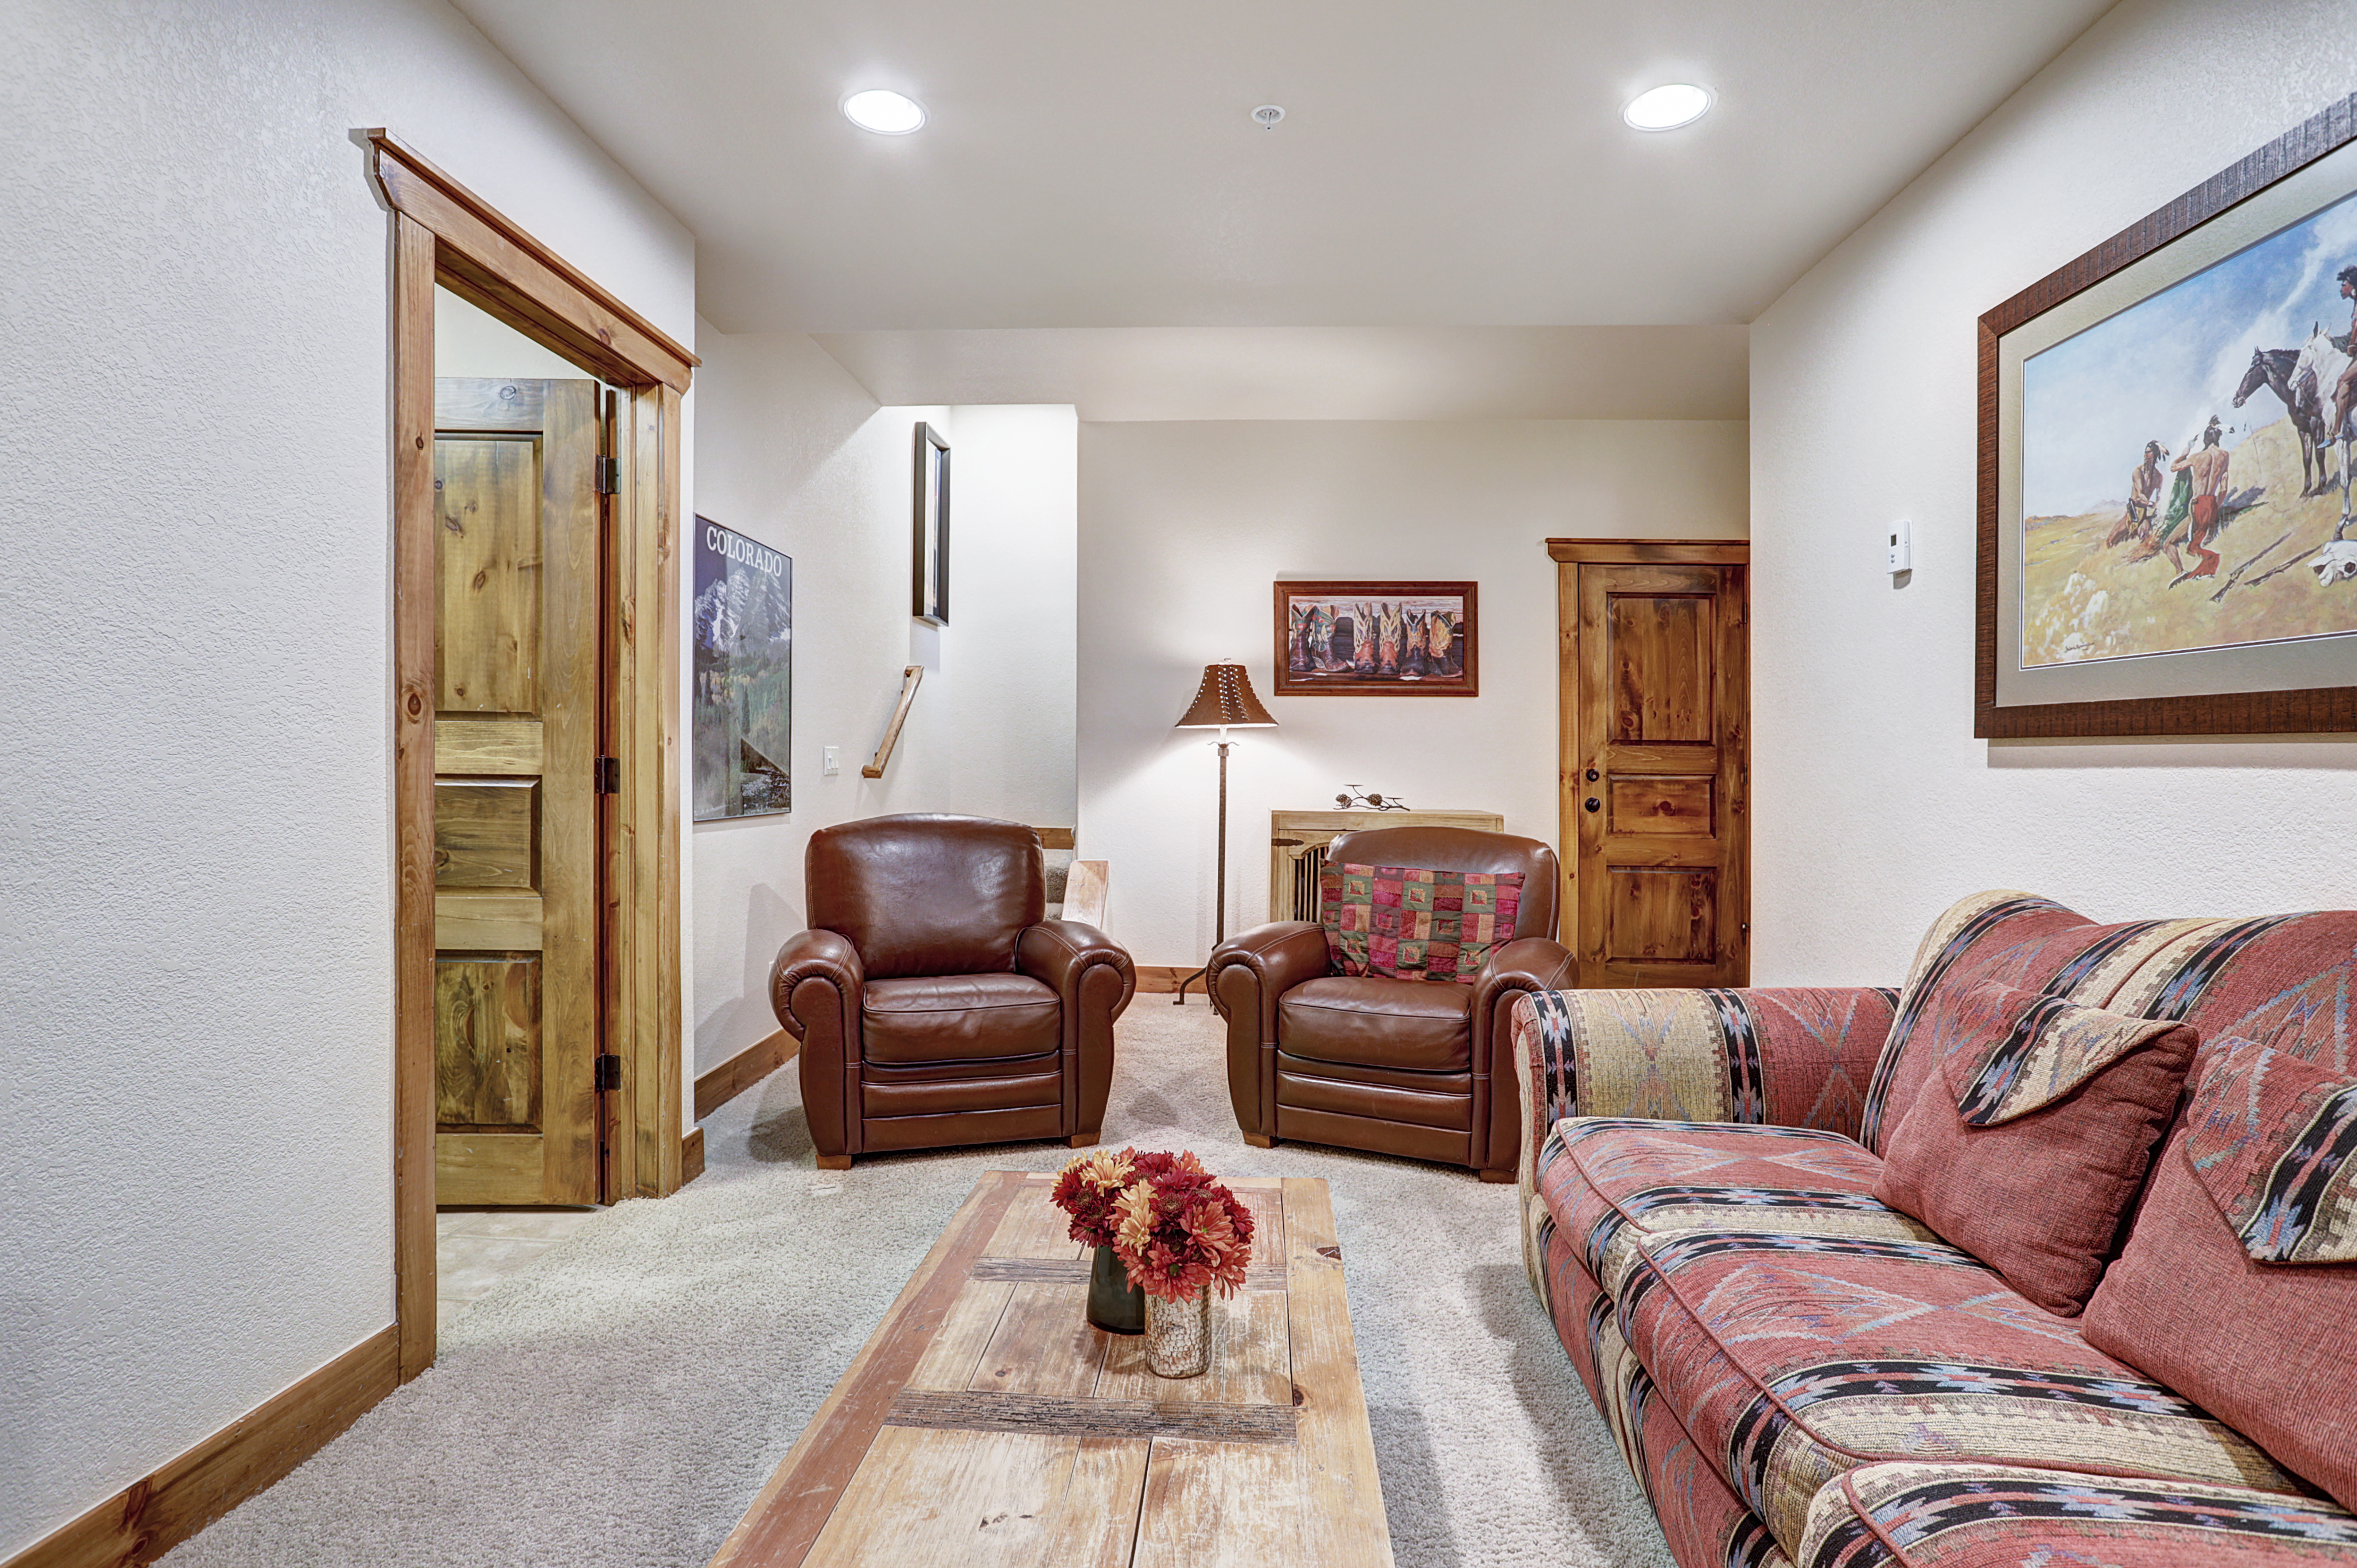 Additional view of the bottom floor living area - Amber Sky Breckenridge Vacation Rental